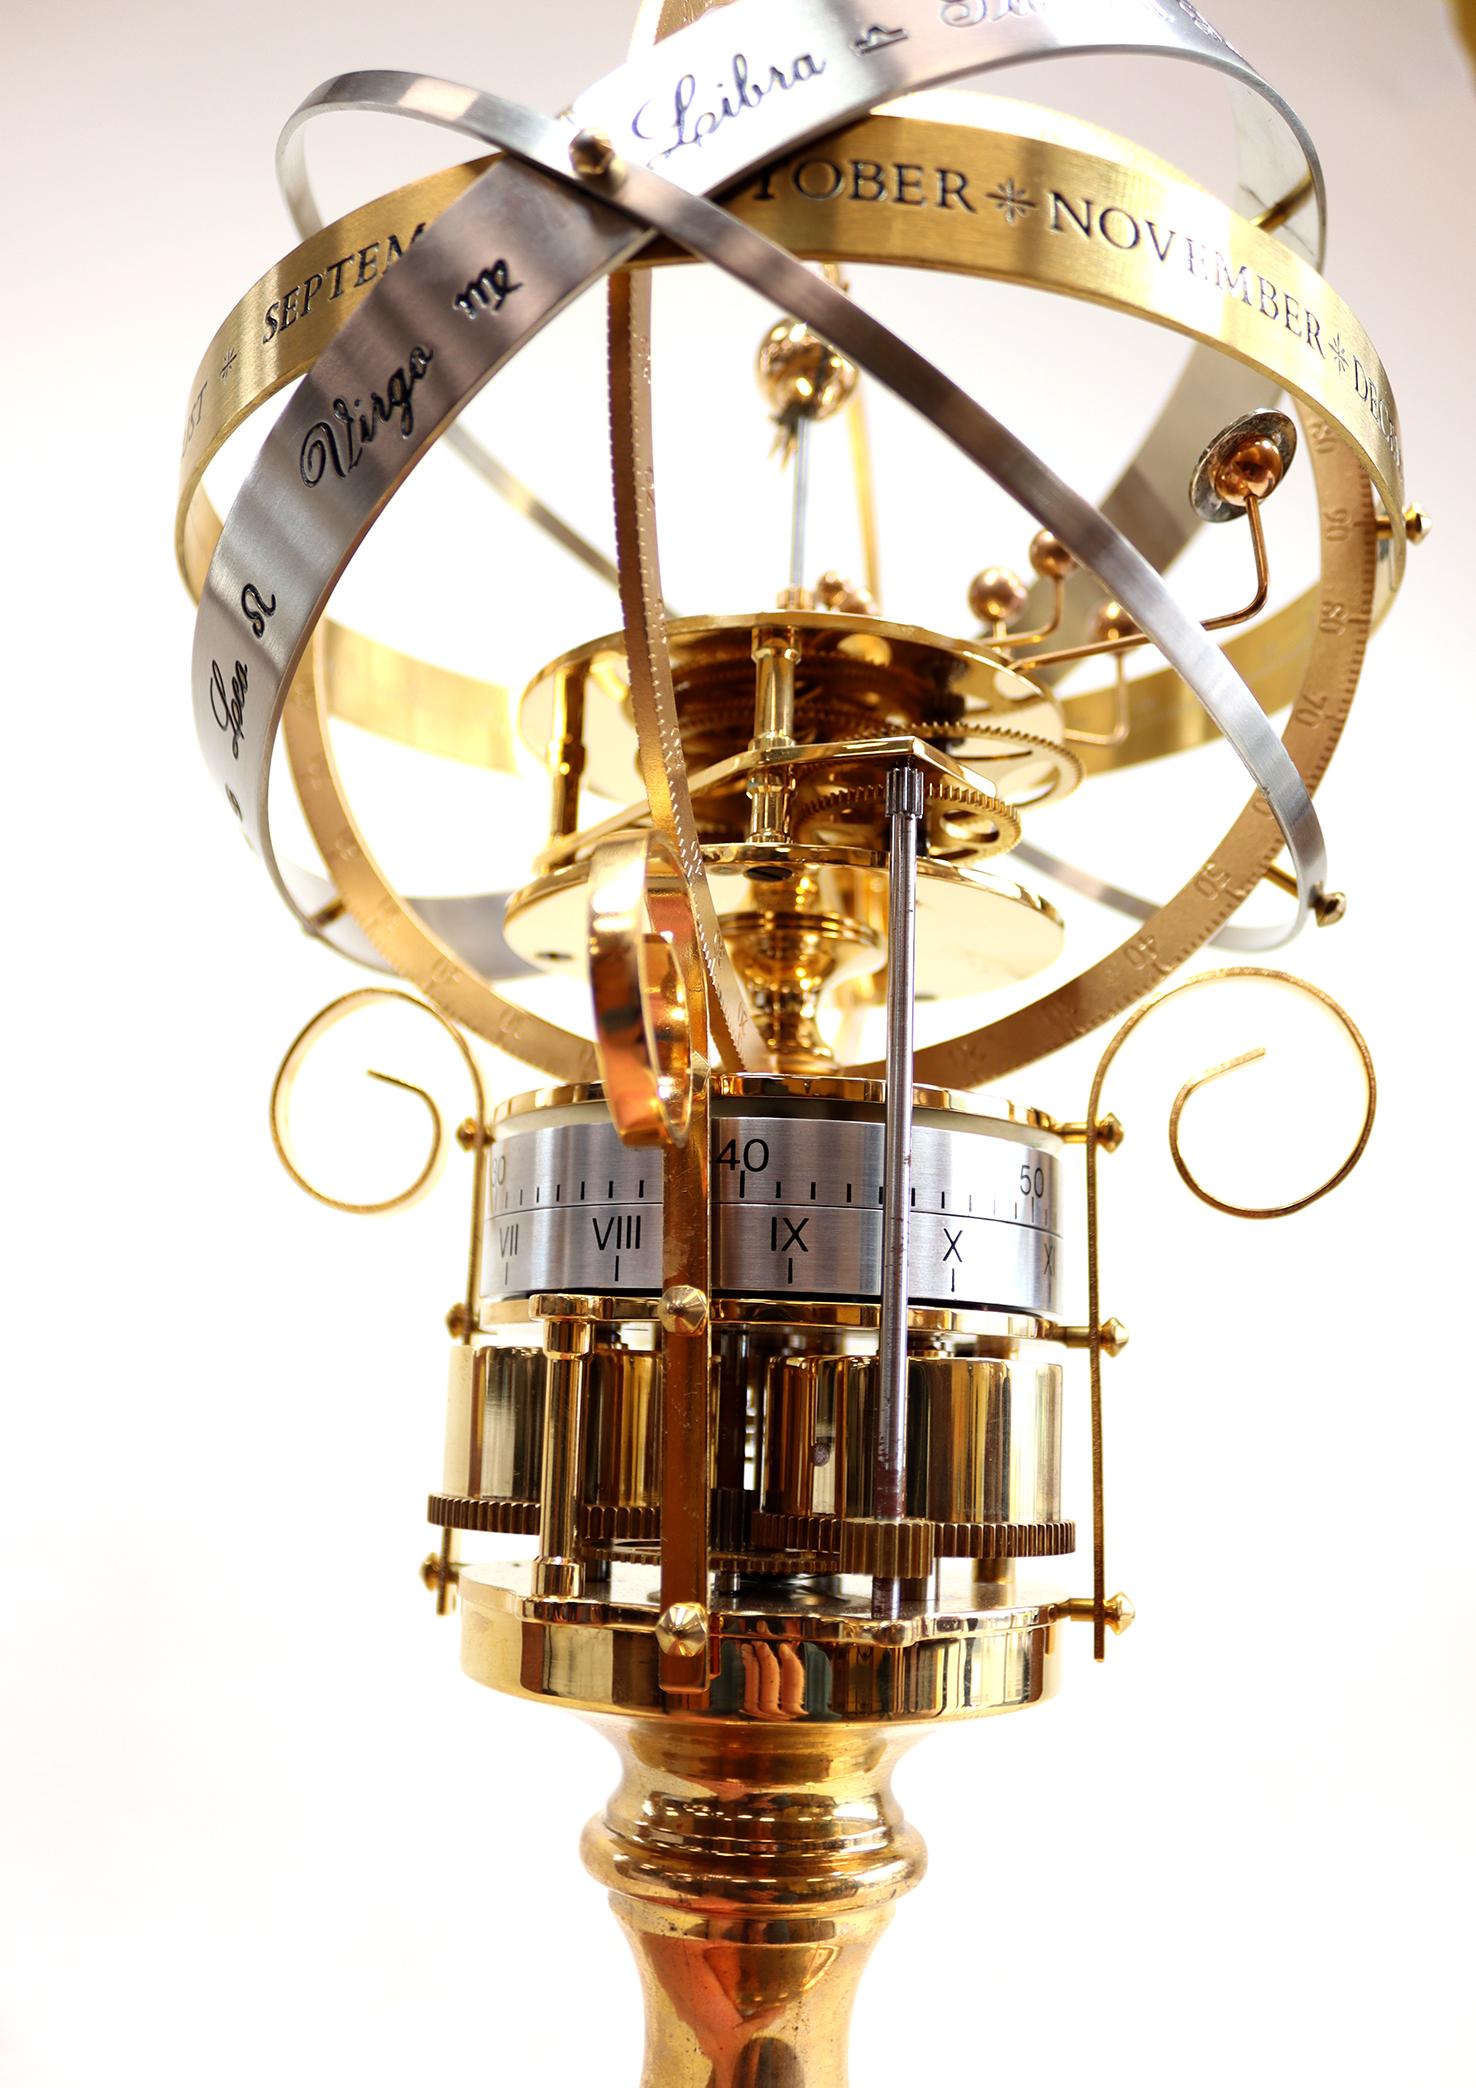 20th Century Limited Edition Mid-Century Orrery Clock by Devon Clocks For Sale